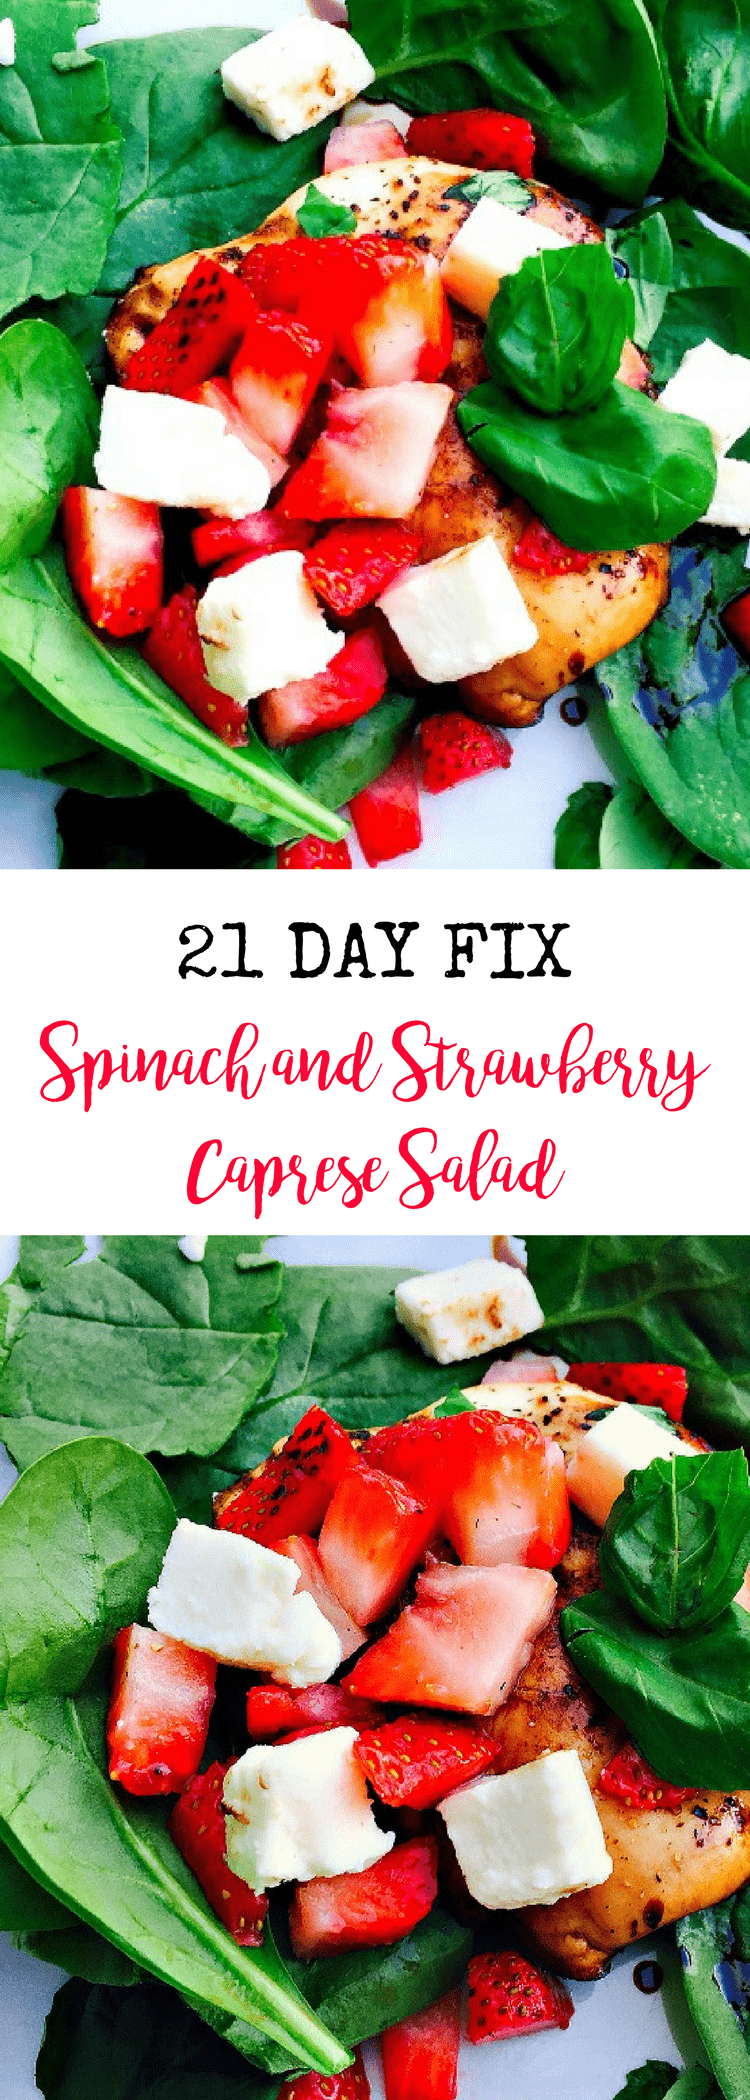 21 Day Fix Spinach and Strawberry Caprese Salad | Confessions of a Fit Foodie